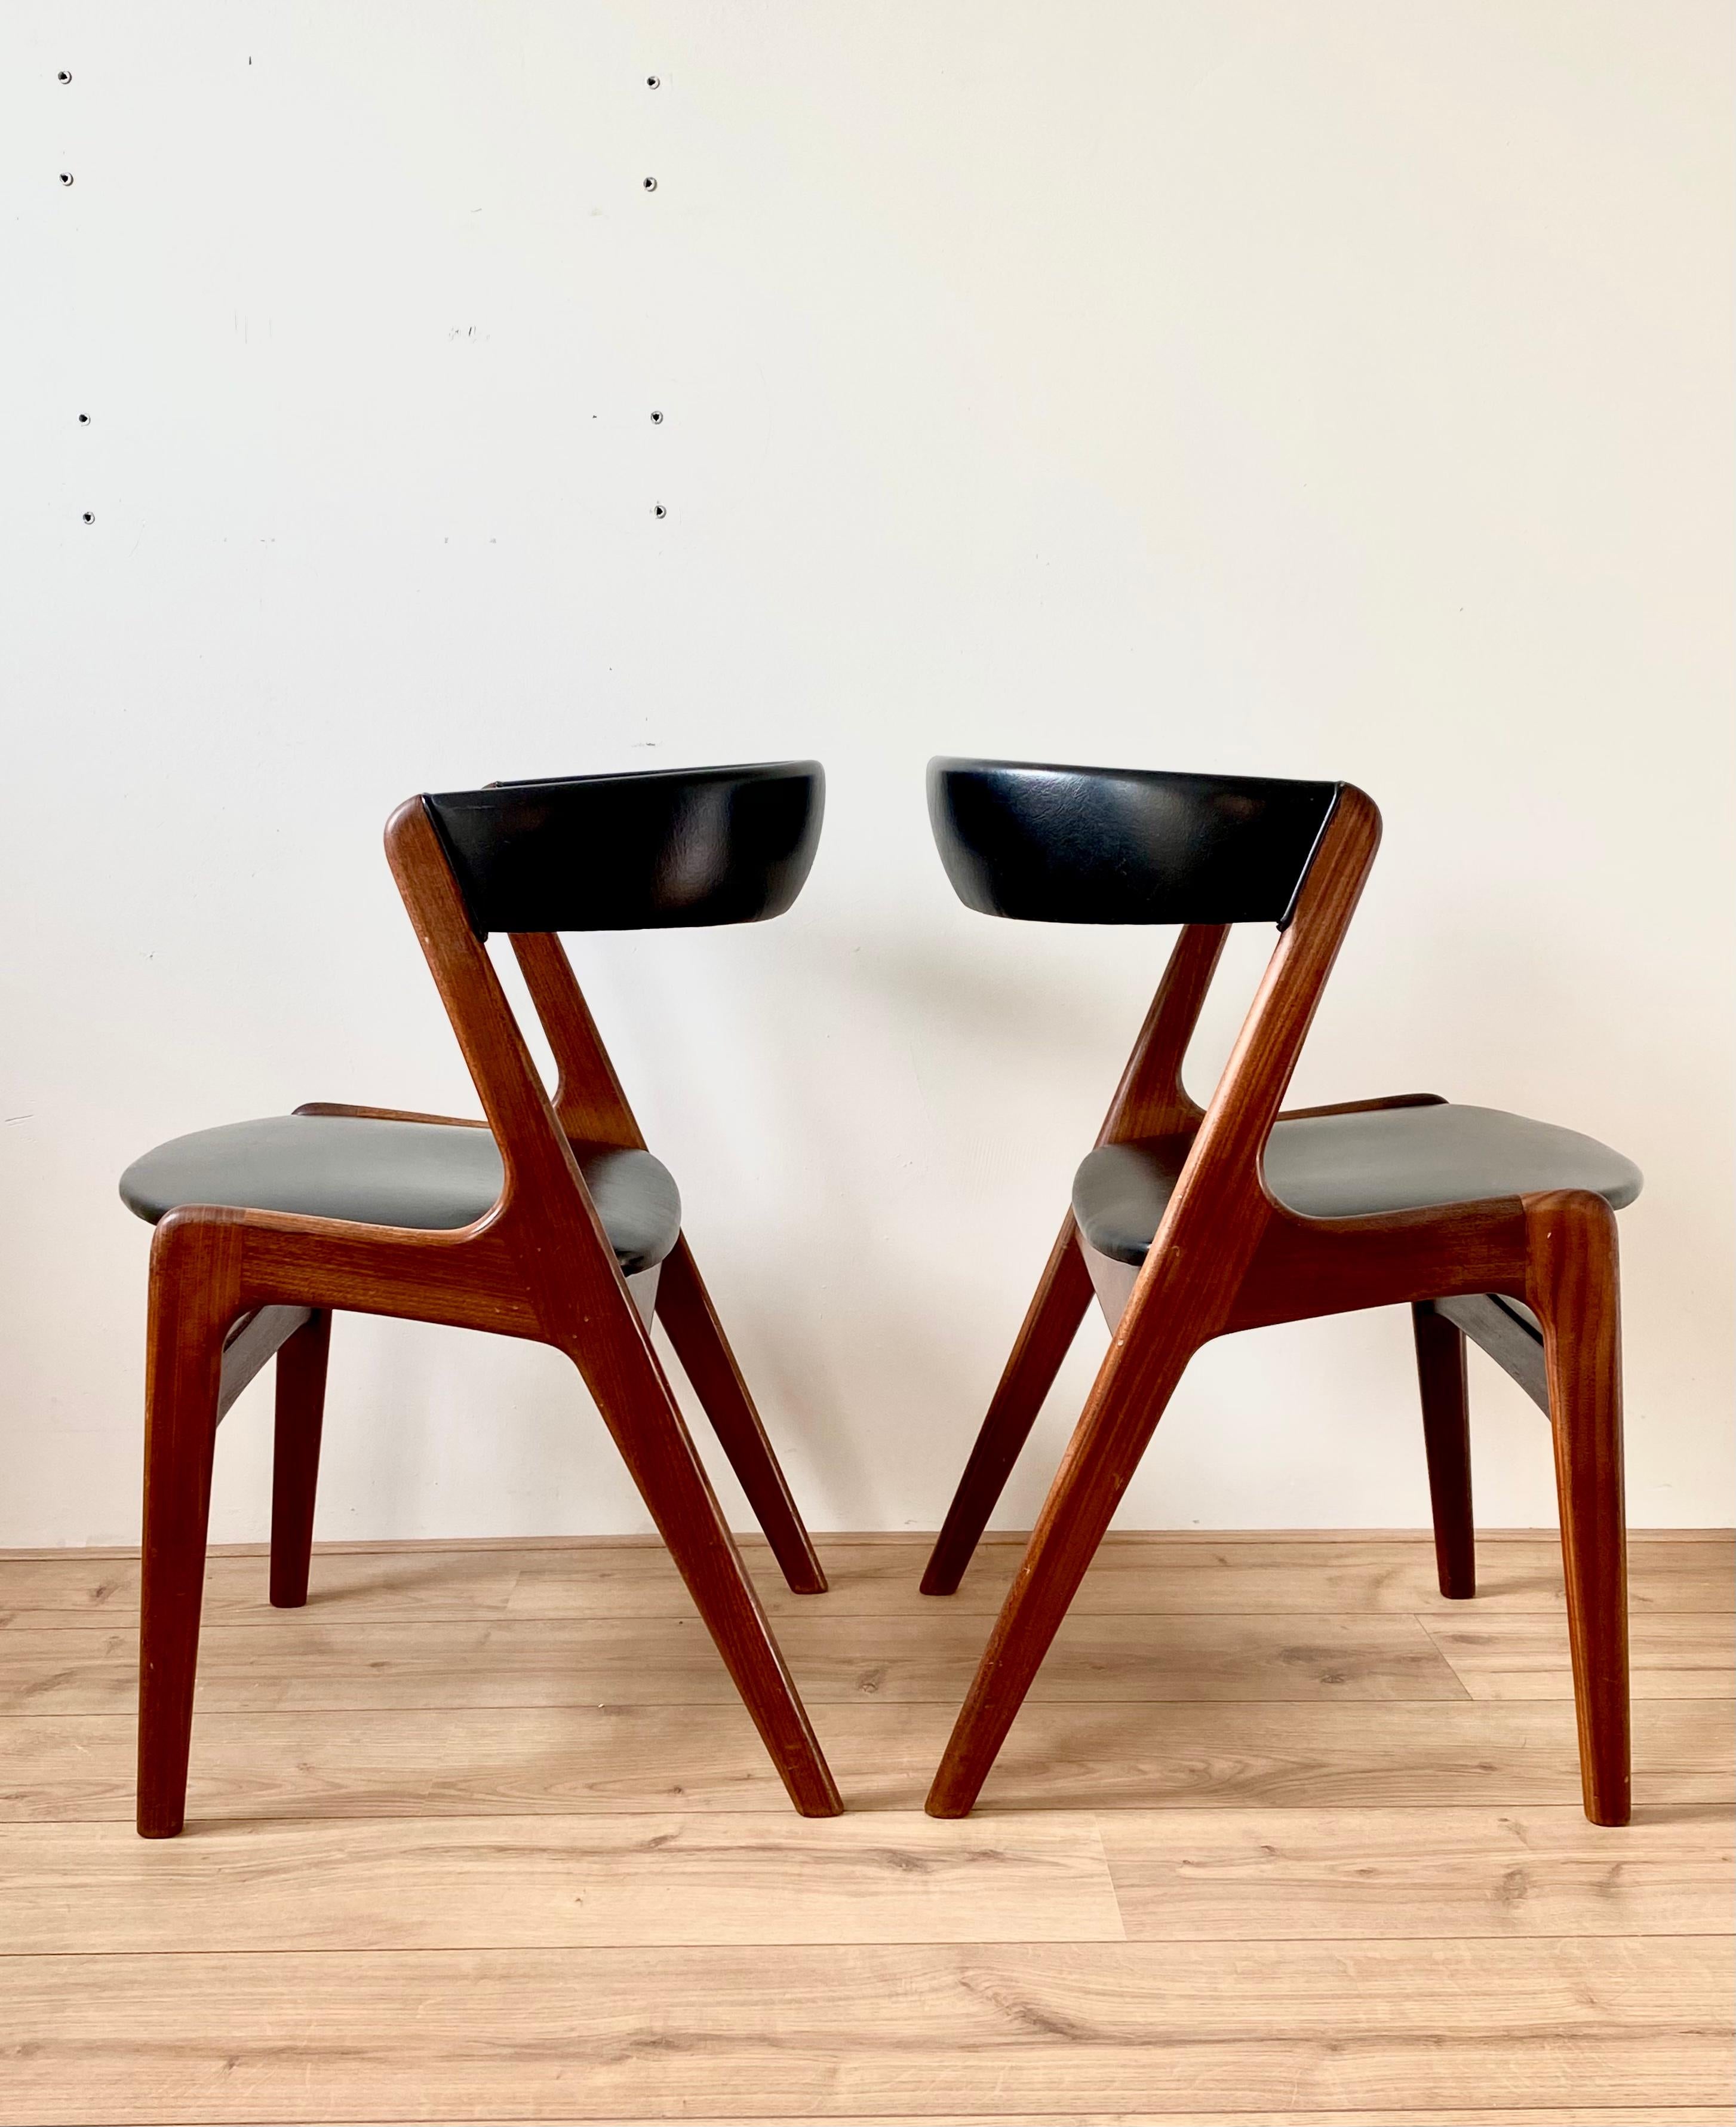 Midcentury Danish Design Dining Chairs By T.H. Harlev for Farstrup Mobler. For Sale 3